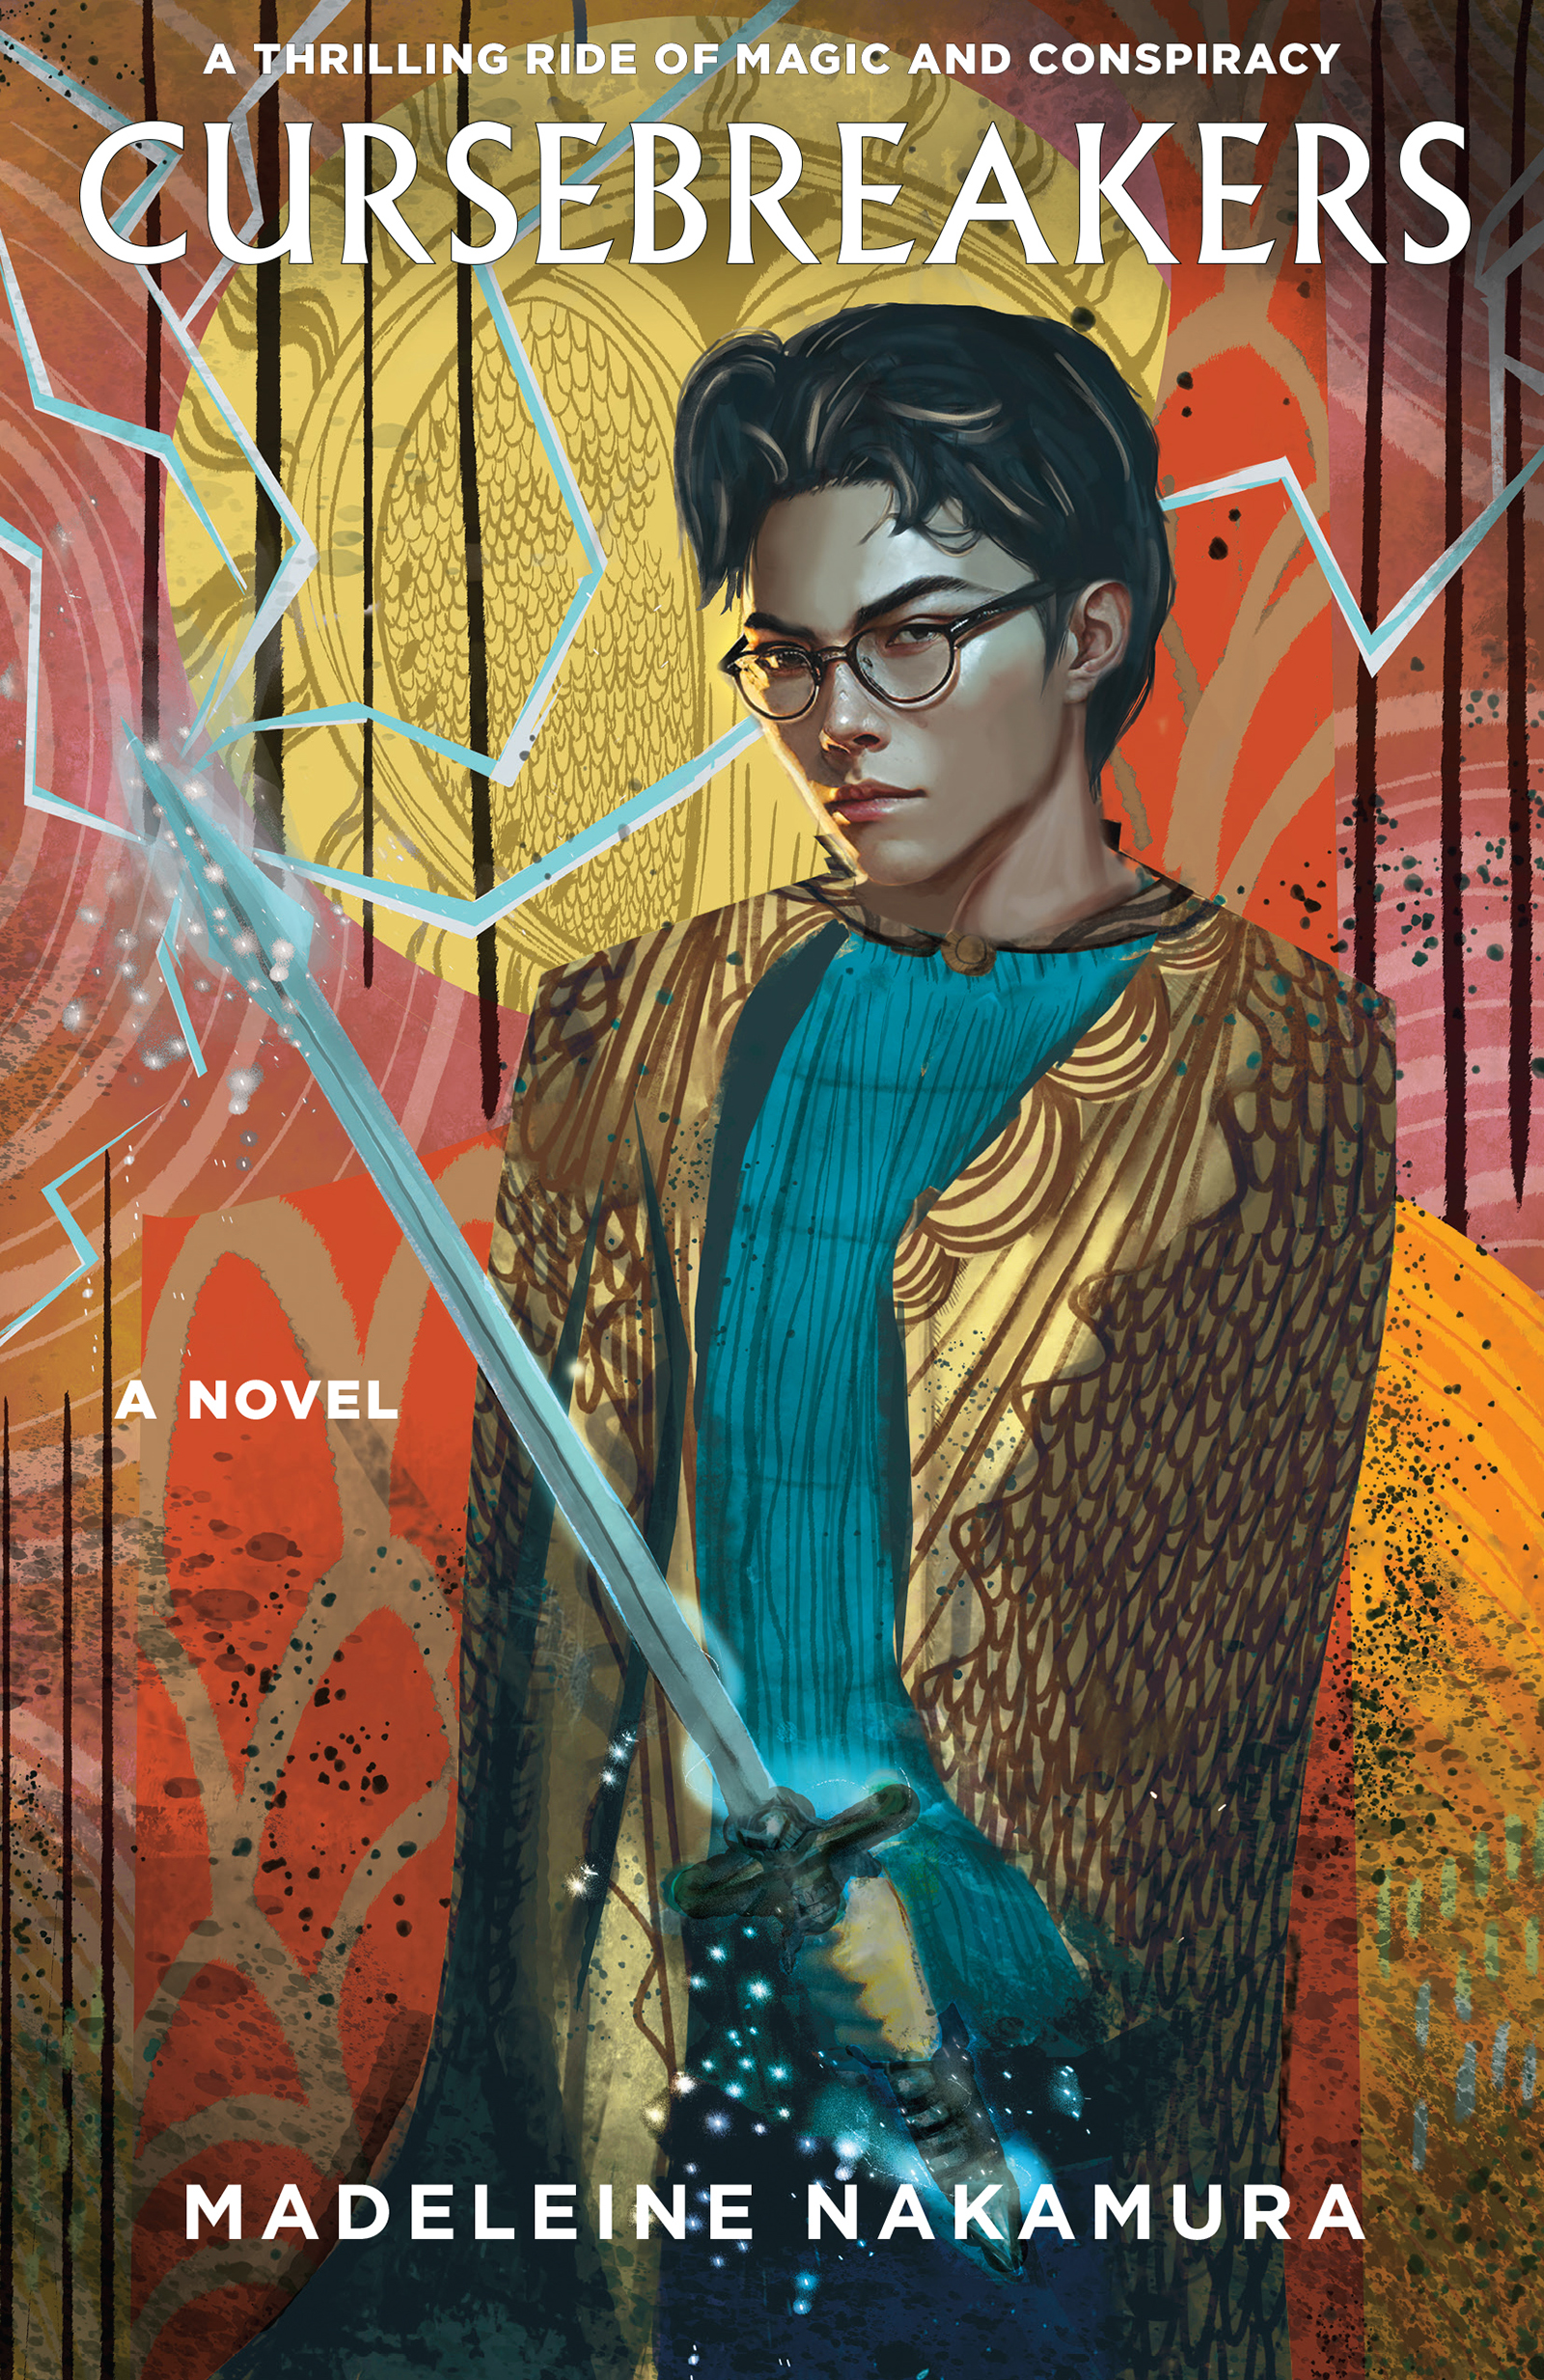 A graphic of a young man with glasses in a robe holding a soldier that sparks. Above is the title: "Cursebreakers." Below is the author: Madeleine Nakamura."